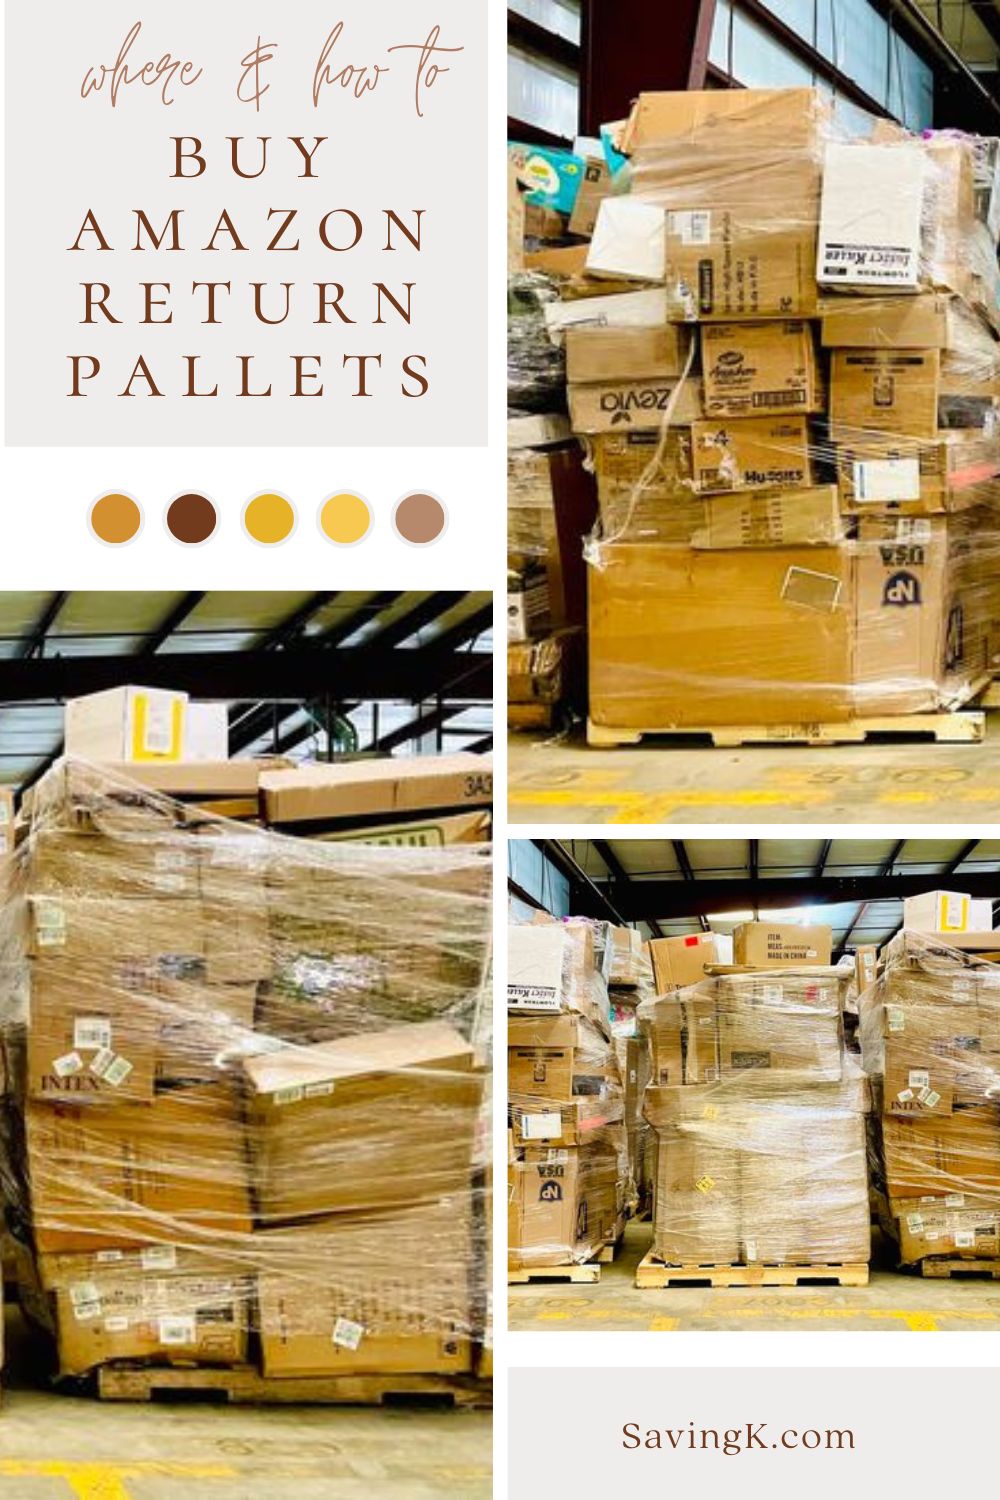 Where & How to Buy Amazon Return Pallets